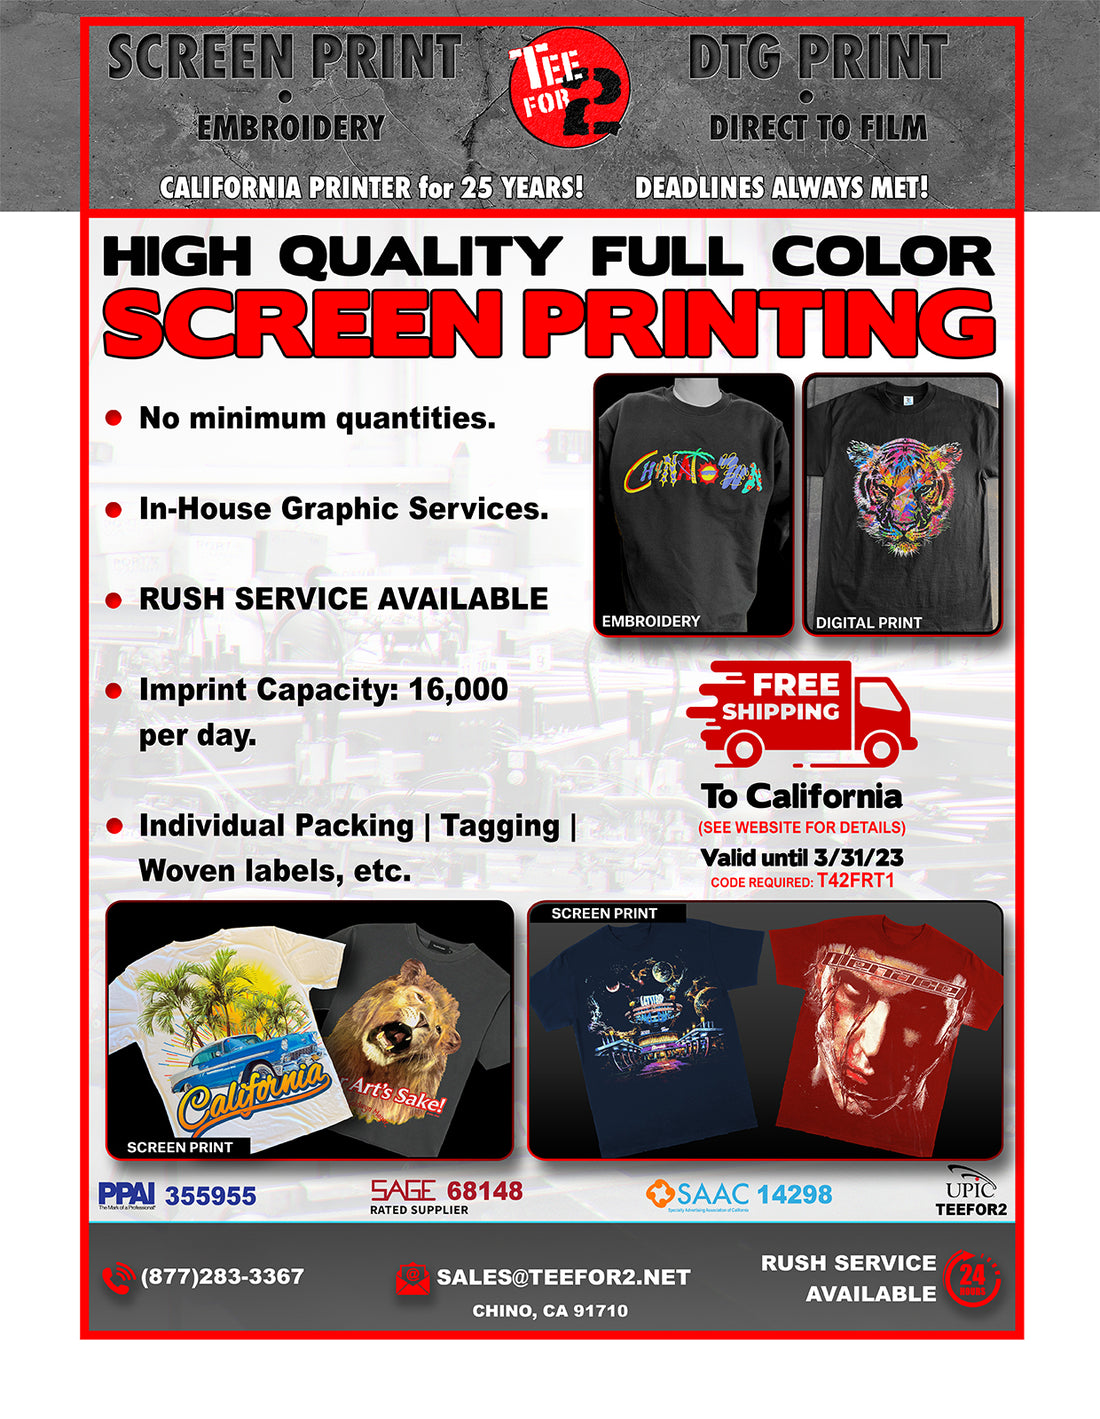 Screen Printing Special